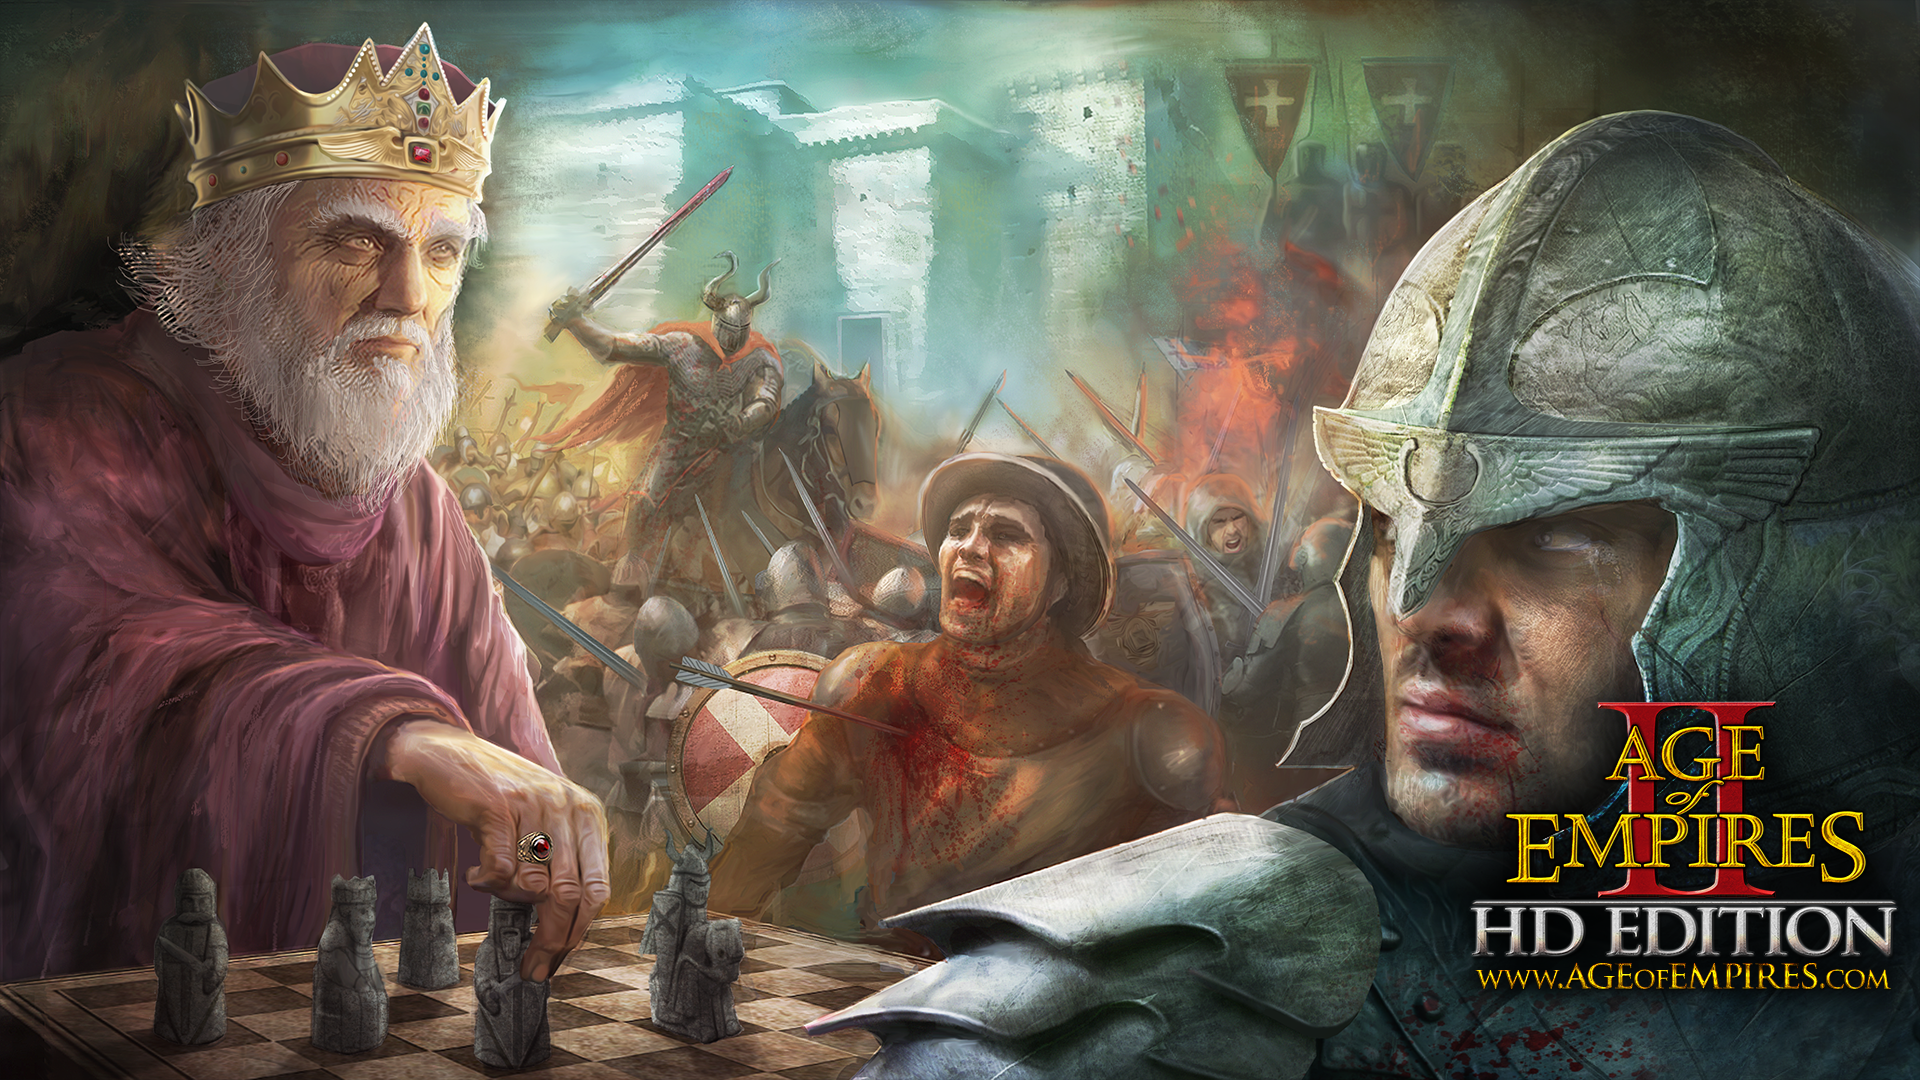 age of empires the age of kings